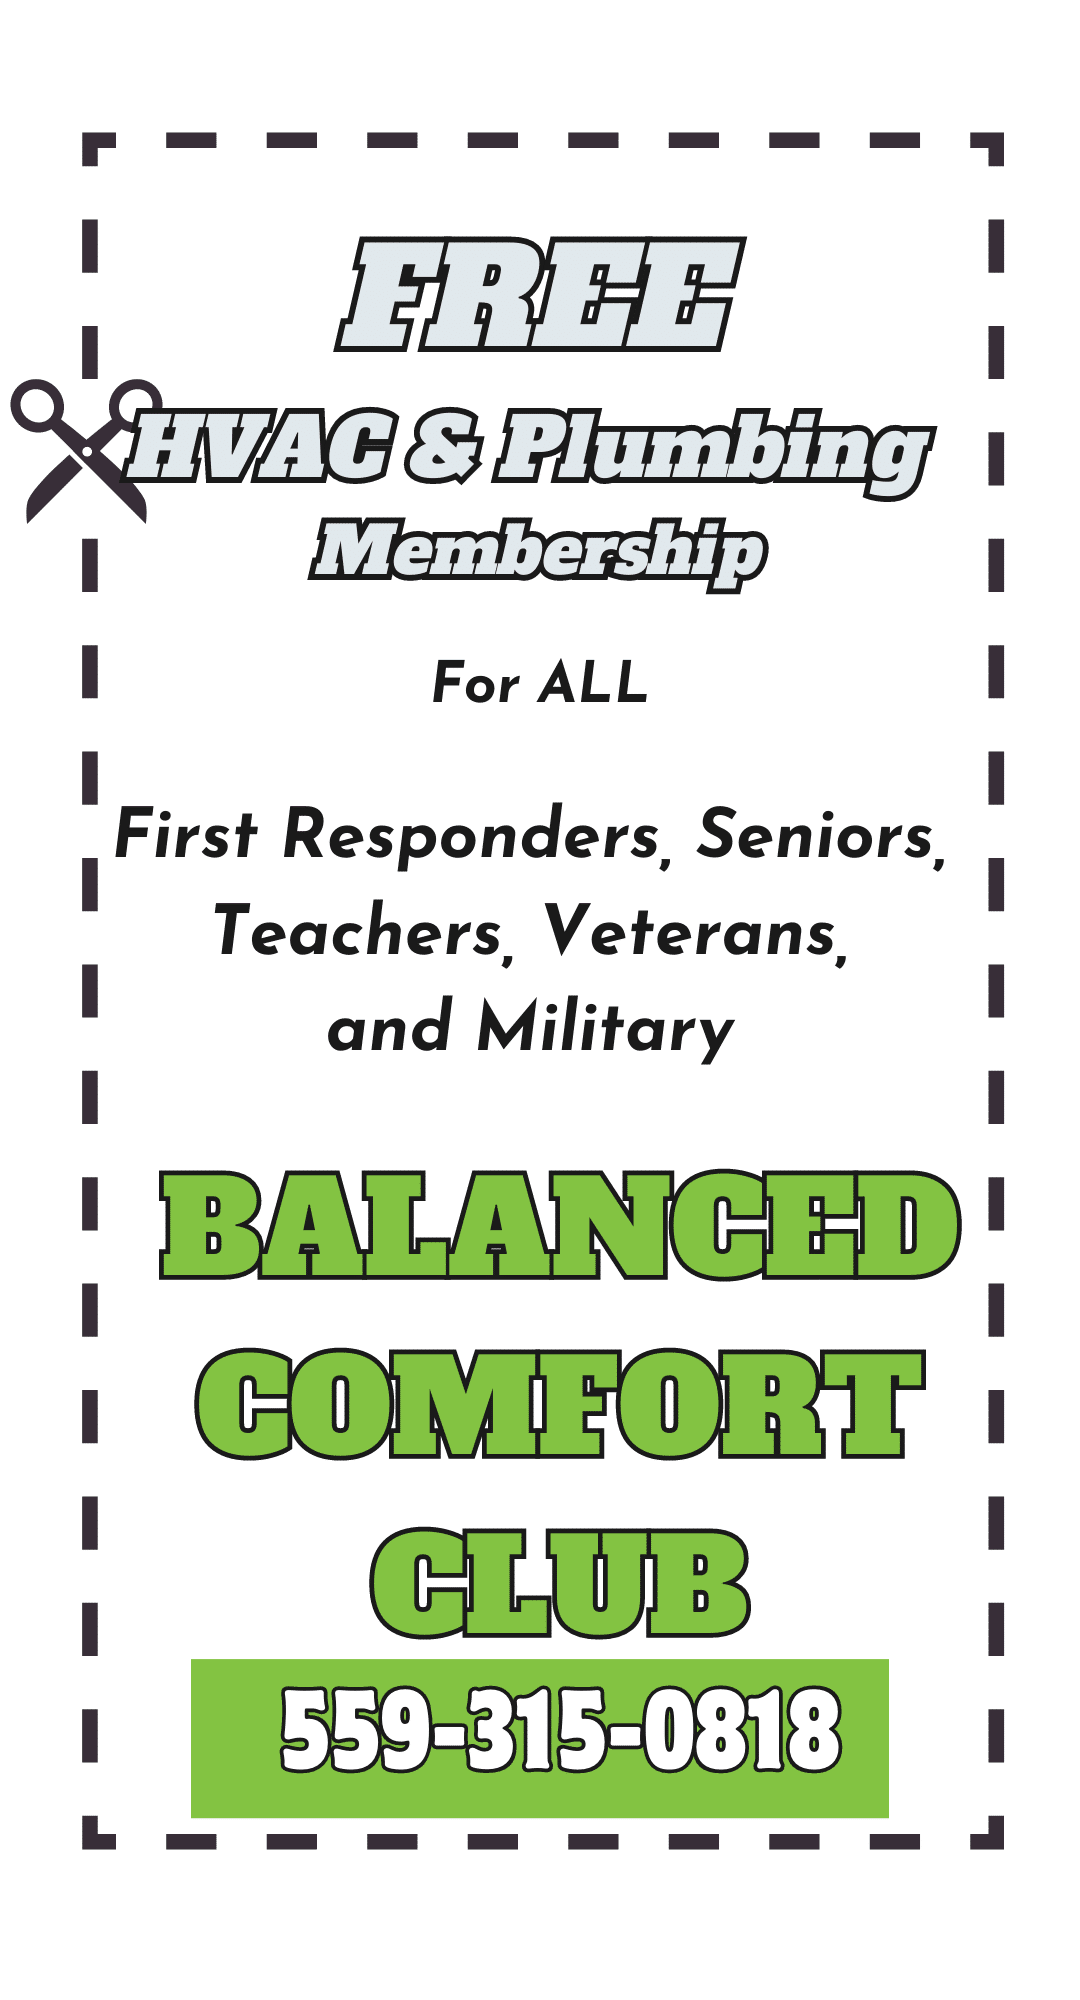 We are offering a free HVAC and Plumbing membership through our Balanced Comfort Club for all veterans, military, teachers, seniors, and first responders. join today.